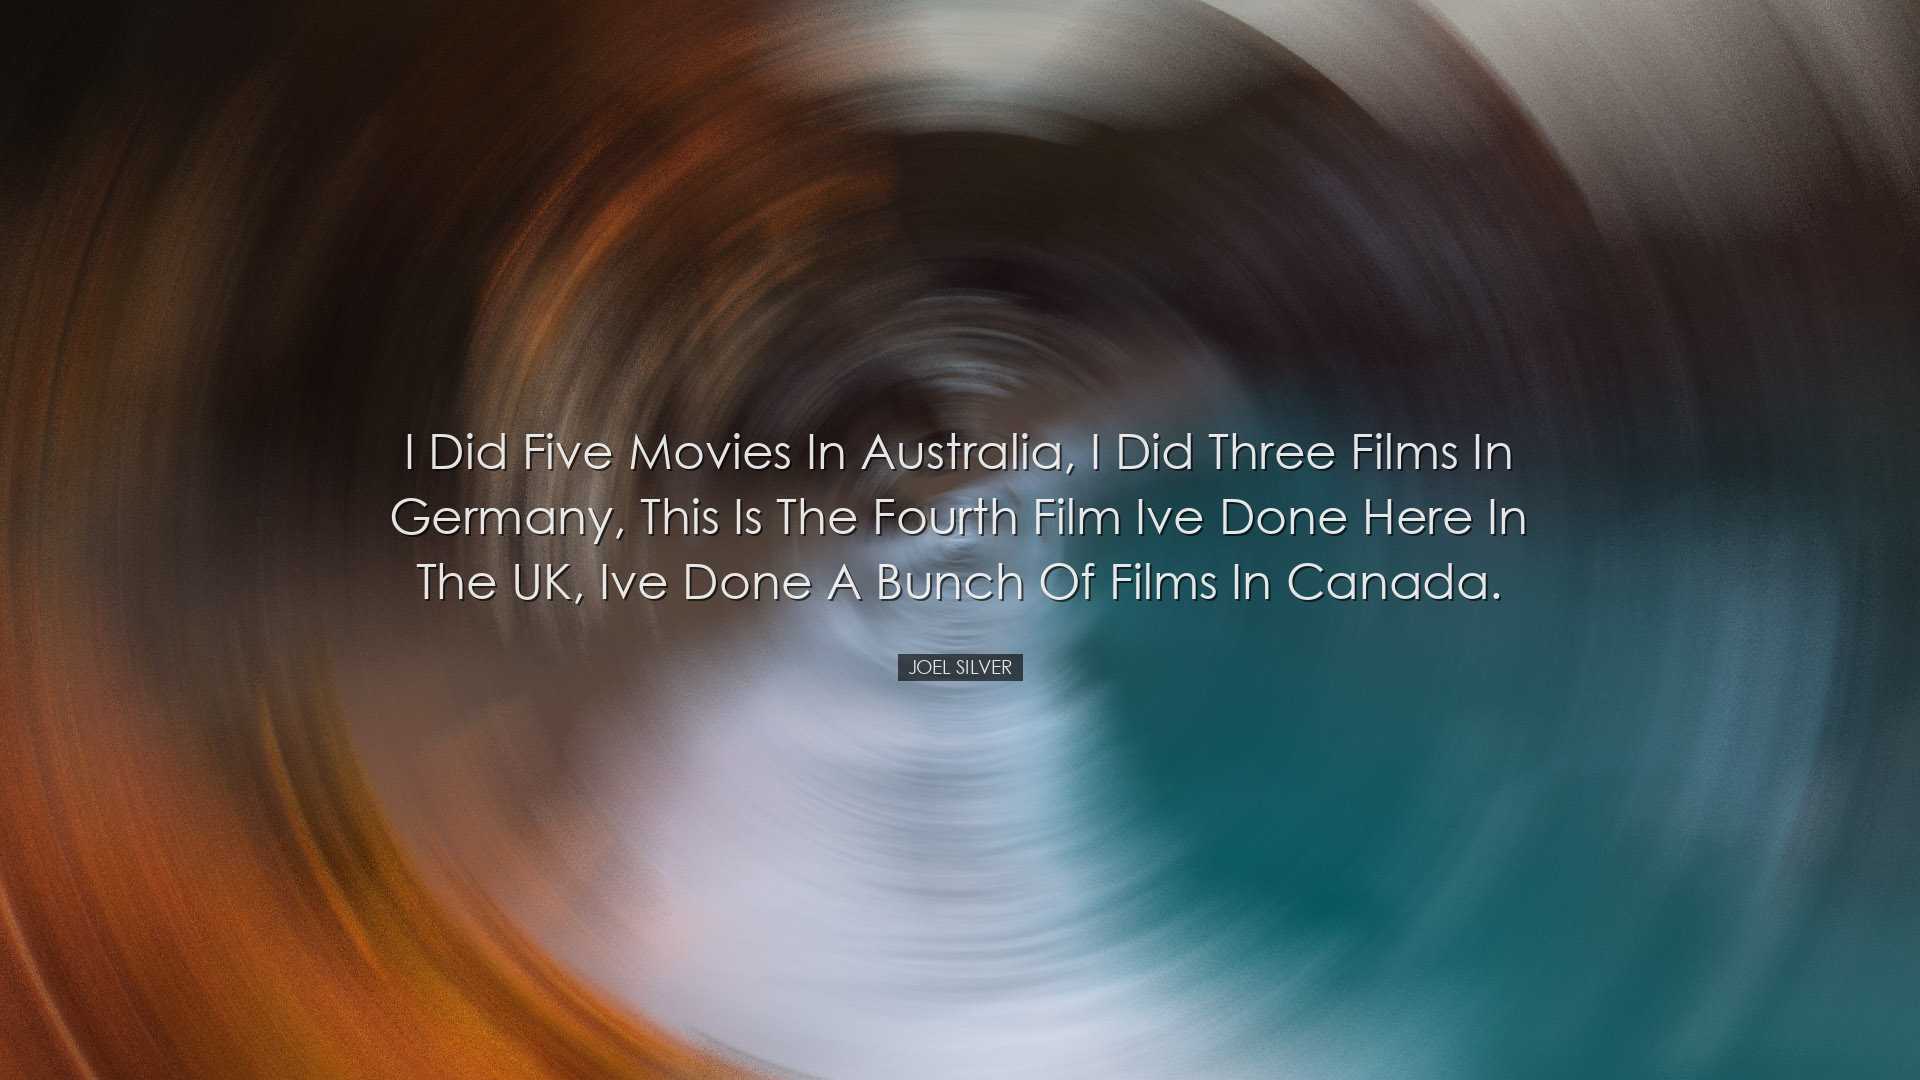 I did five movies in Australia, I did three films in Germany, this